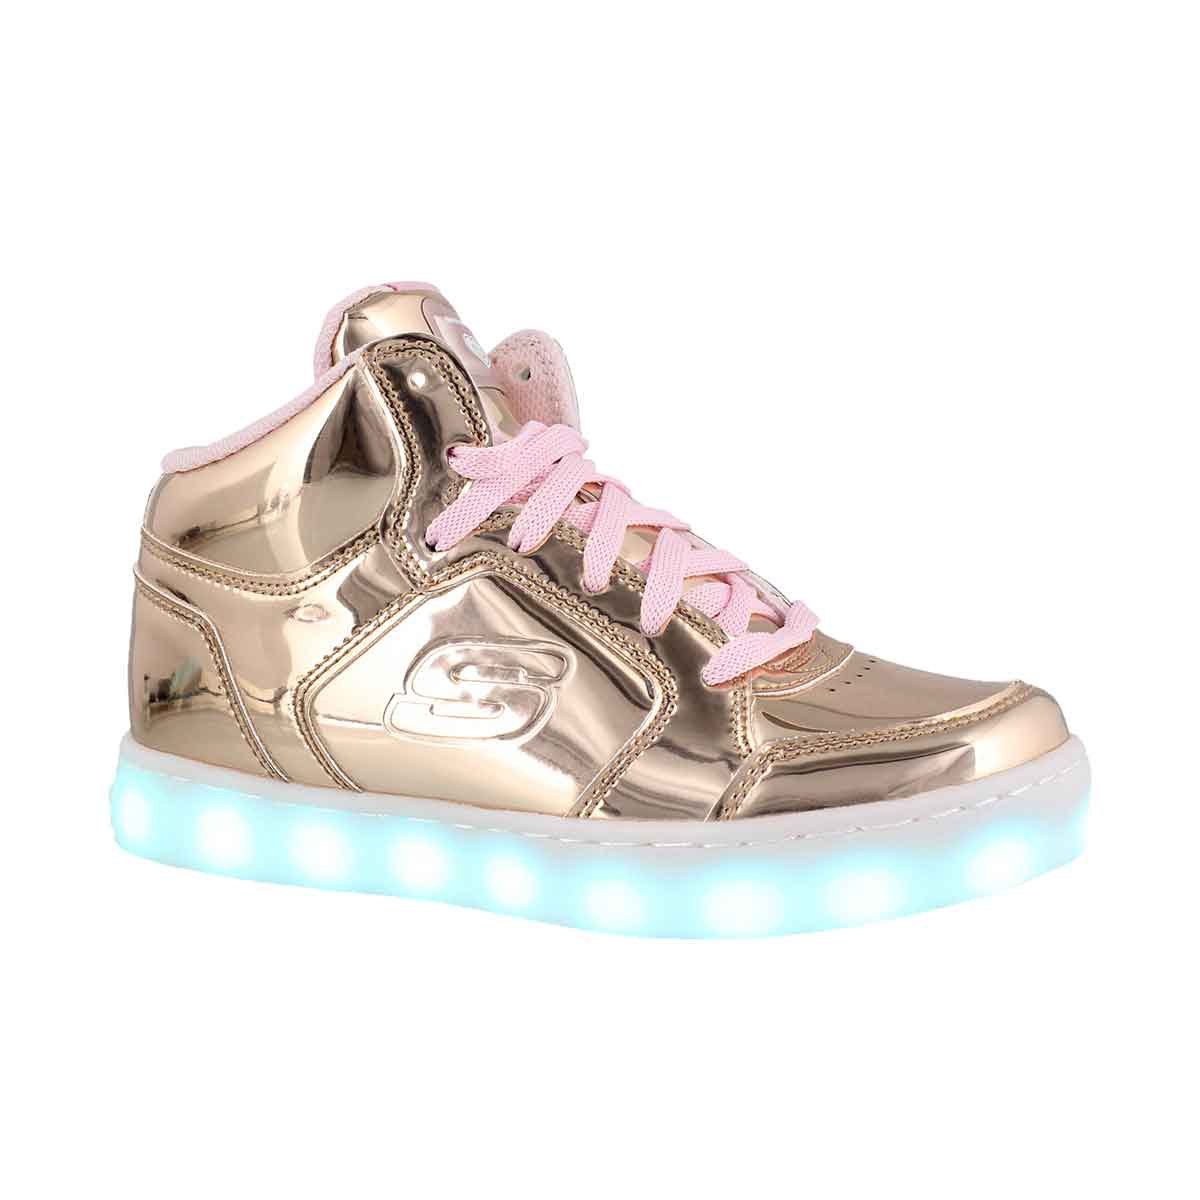 Selling - skechers energy lights video - OFF77% - delivery www.posterbuddy.com!